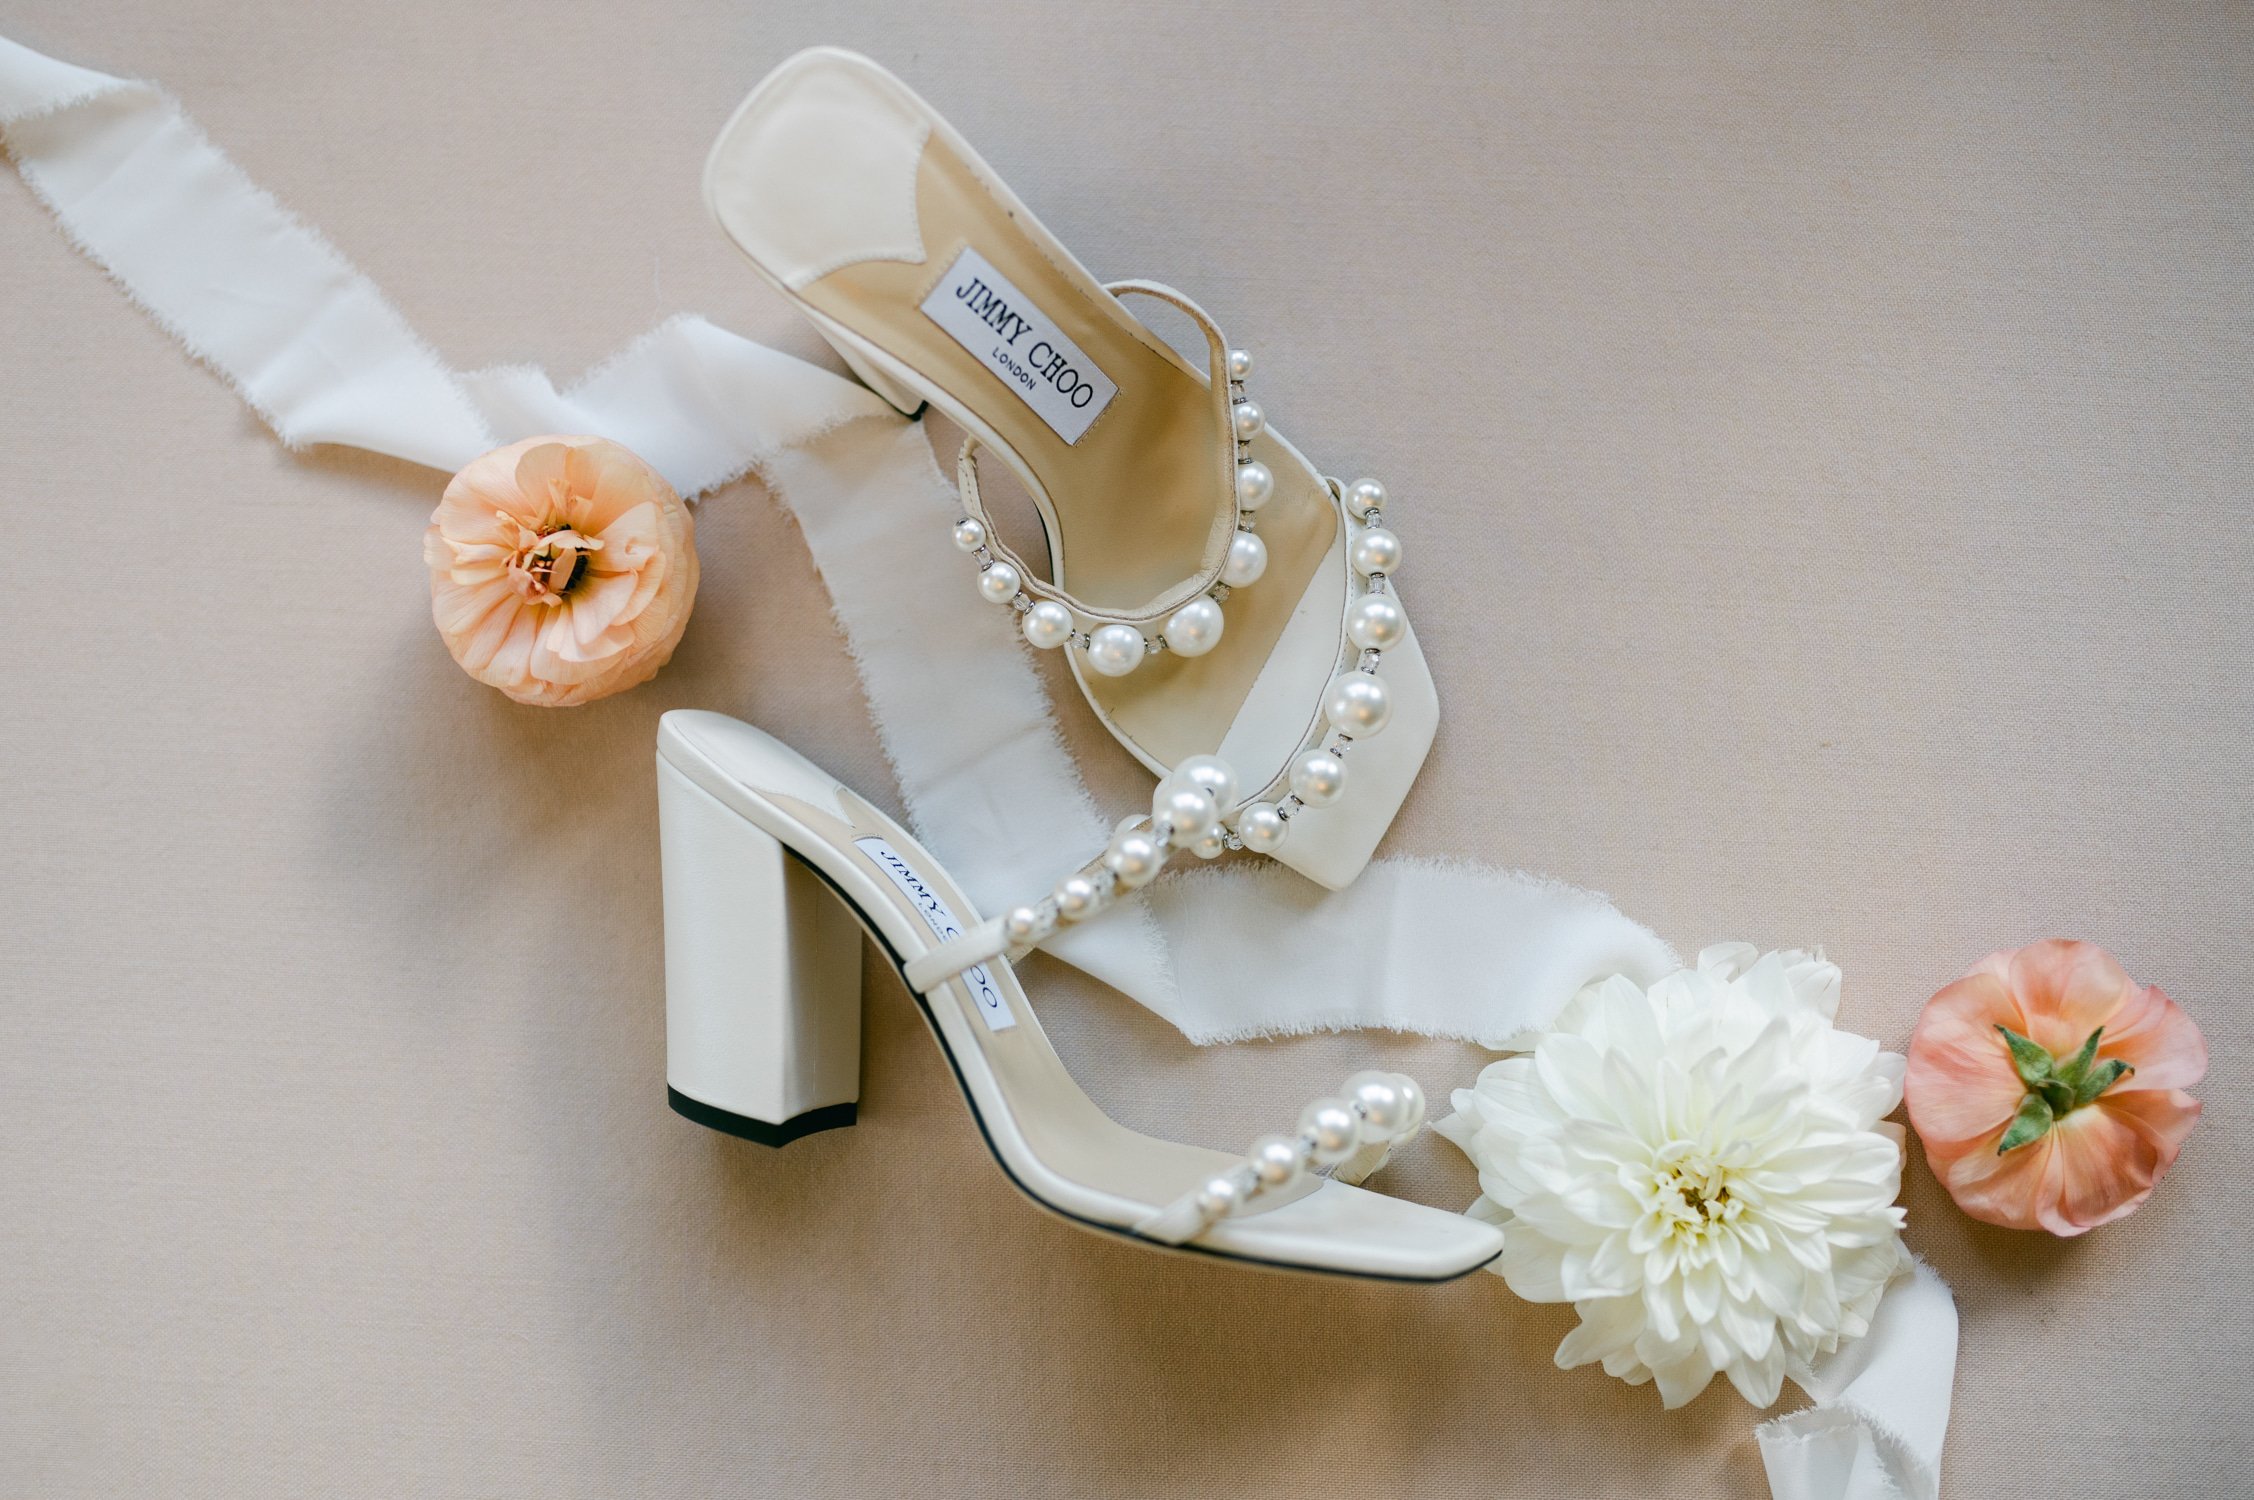 Martis Camp Wedding, photo of the bride’s Jimmy Choo's wedding shoes with pearl accents